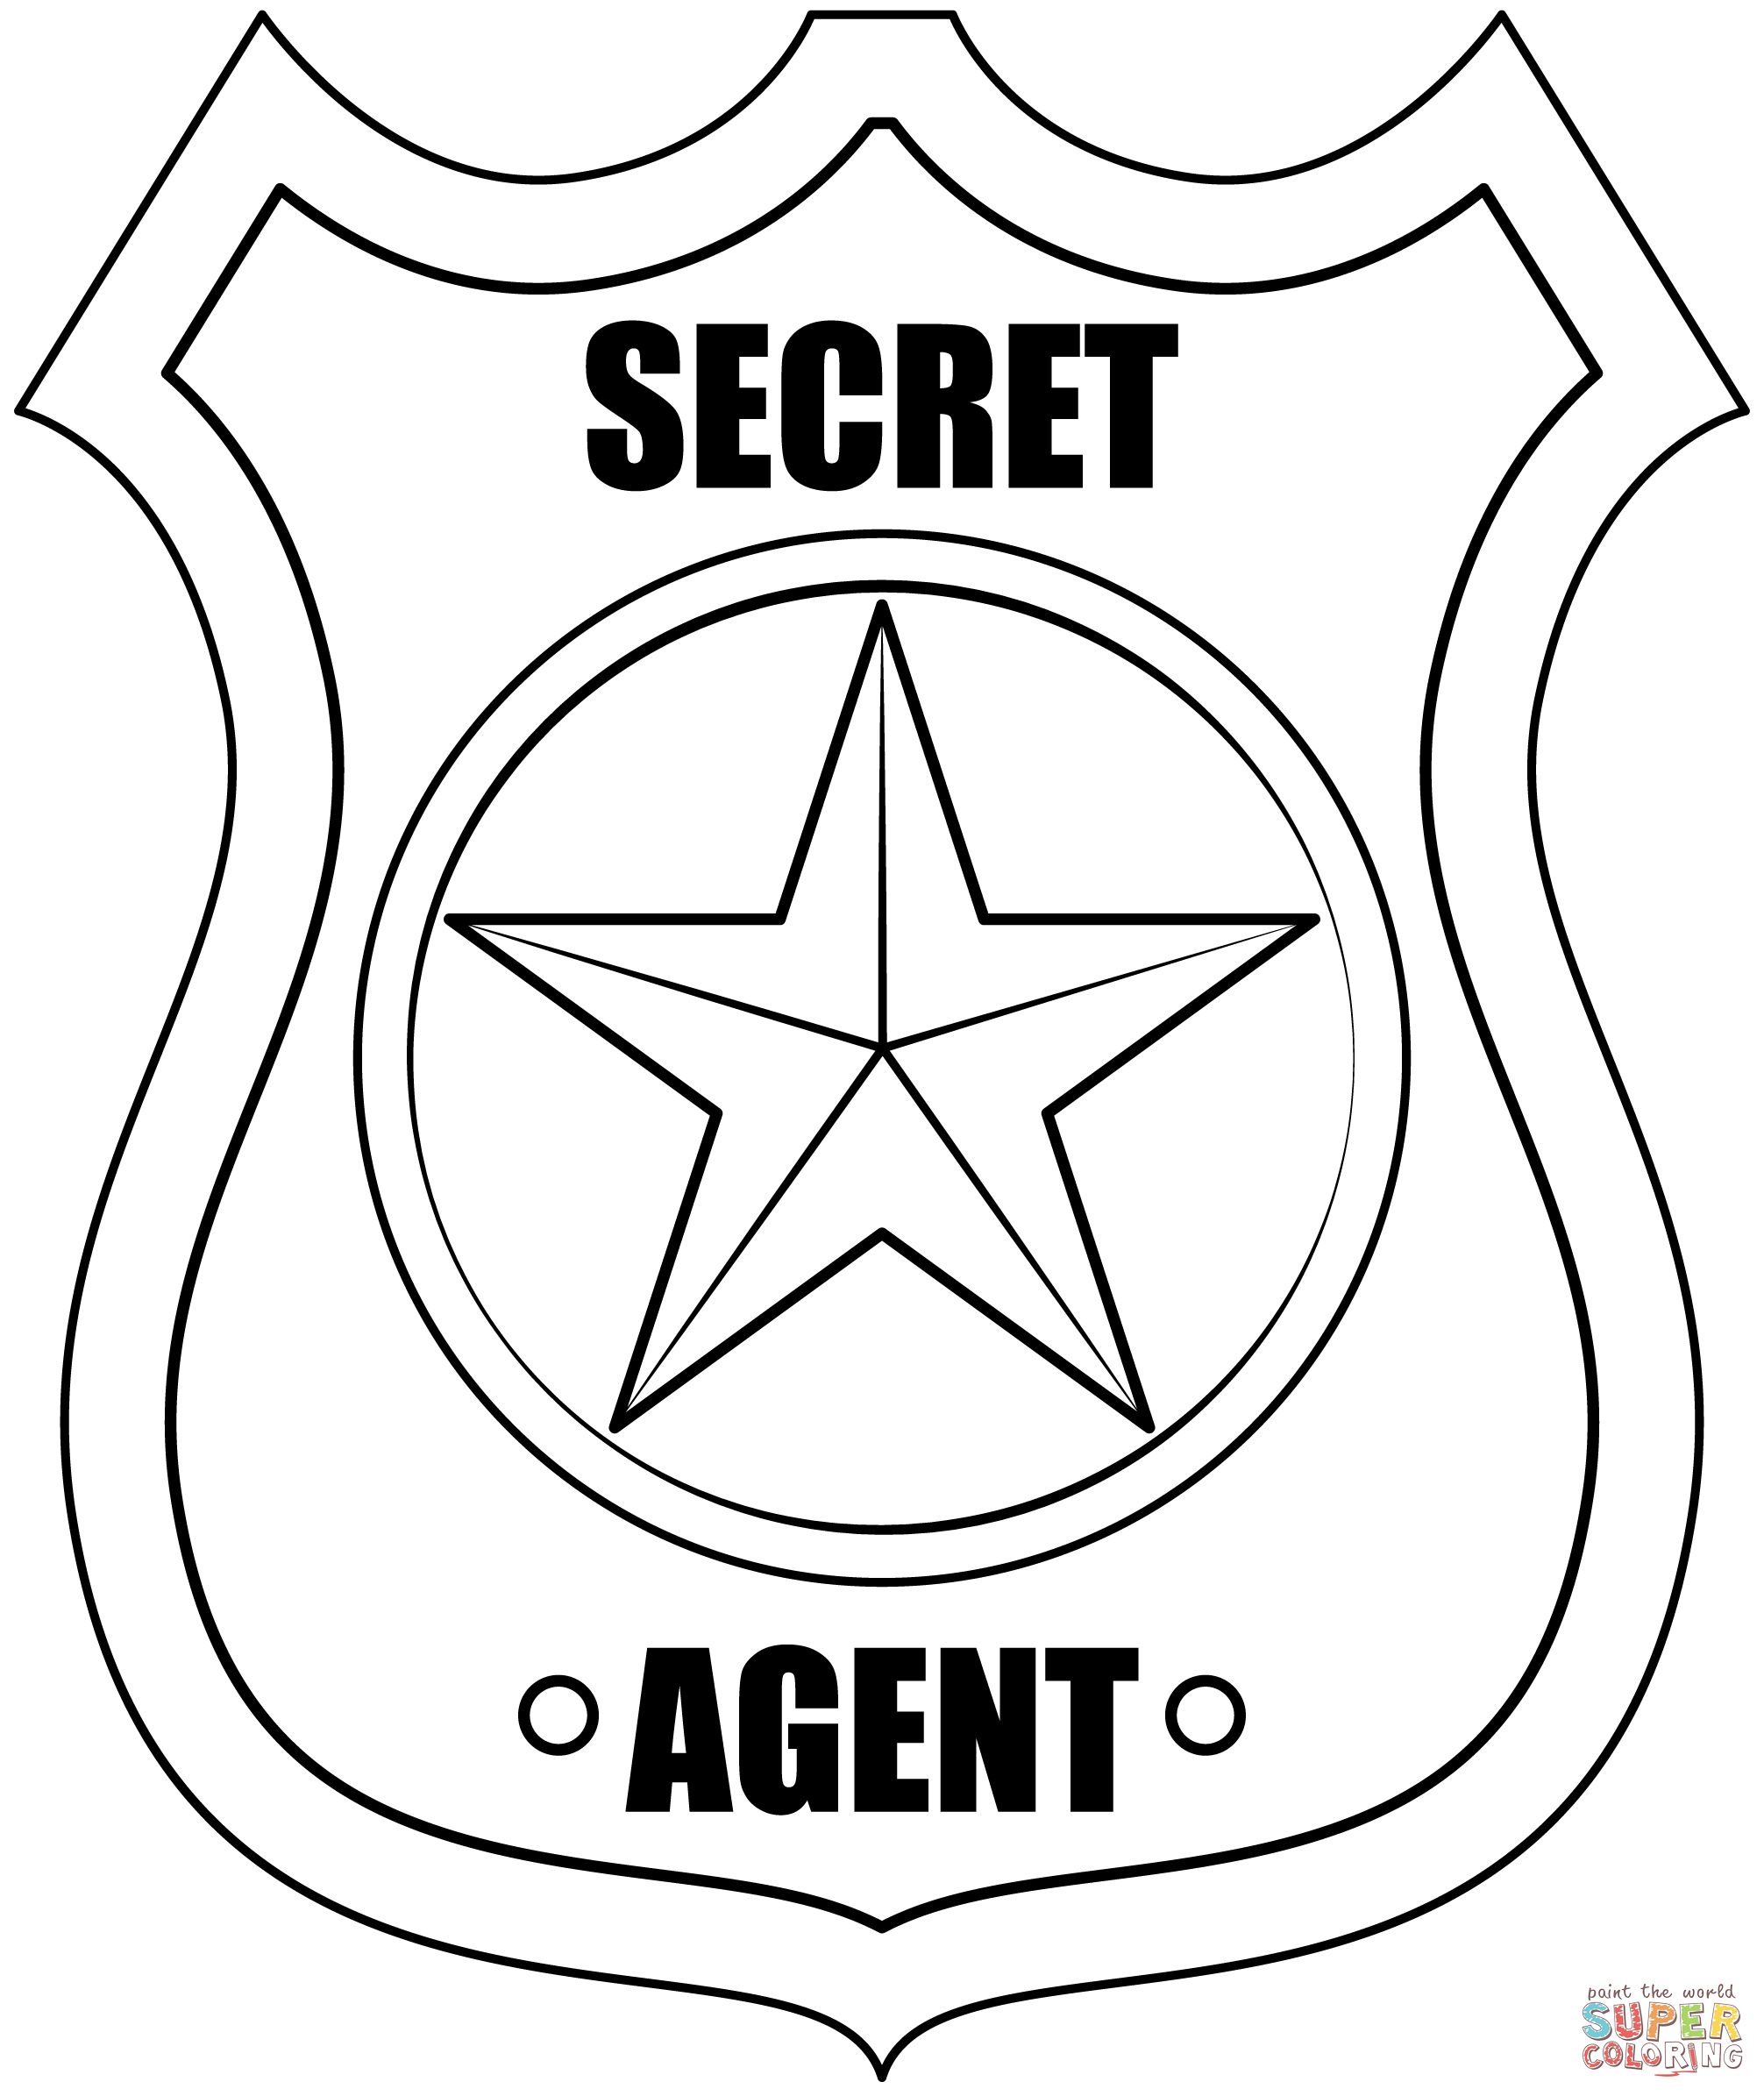 Secret agent badge coloring page free printable coloring pages